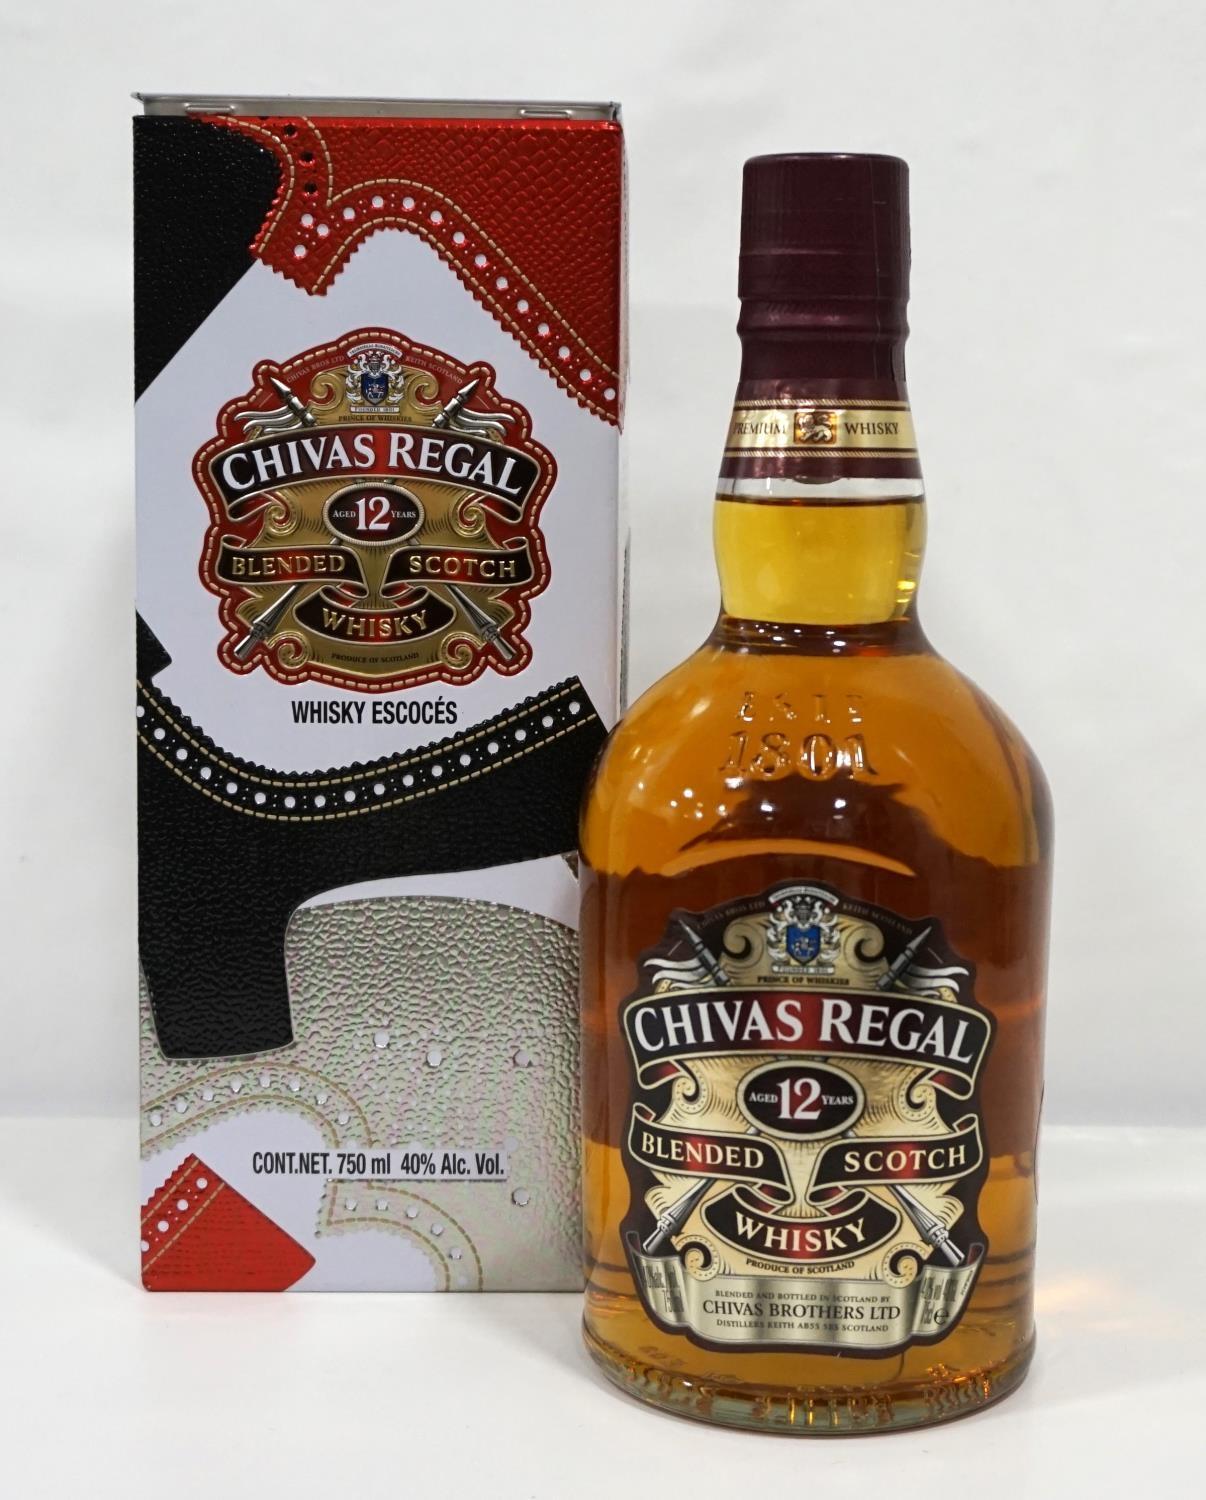 CHIVAS REGAL 12YO - TIM LITTLE A Limited Edition release of the Chivas Regal 12 Year Old Blended